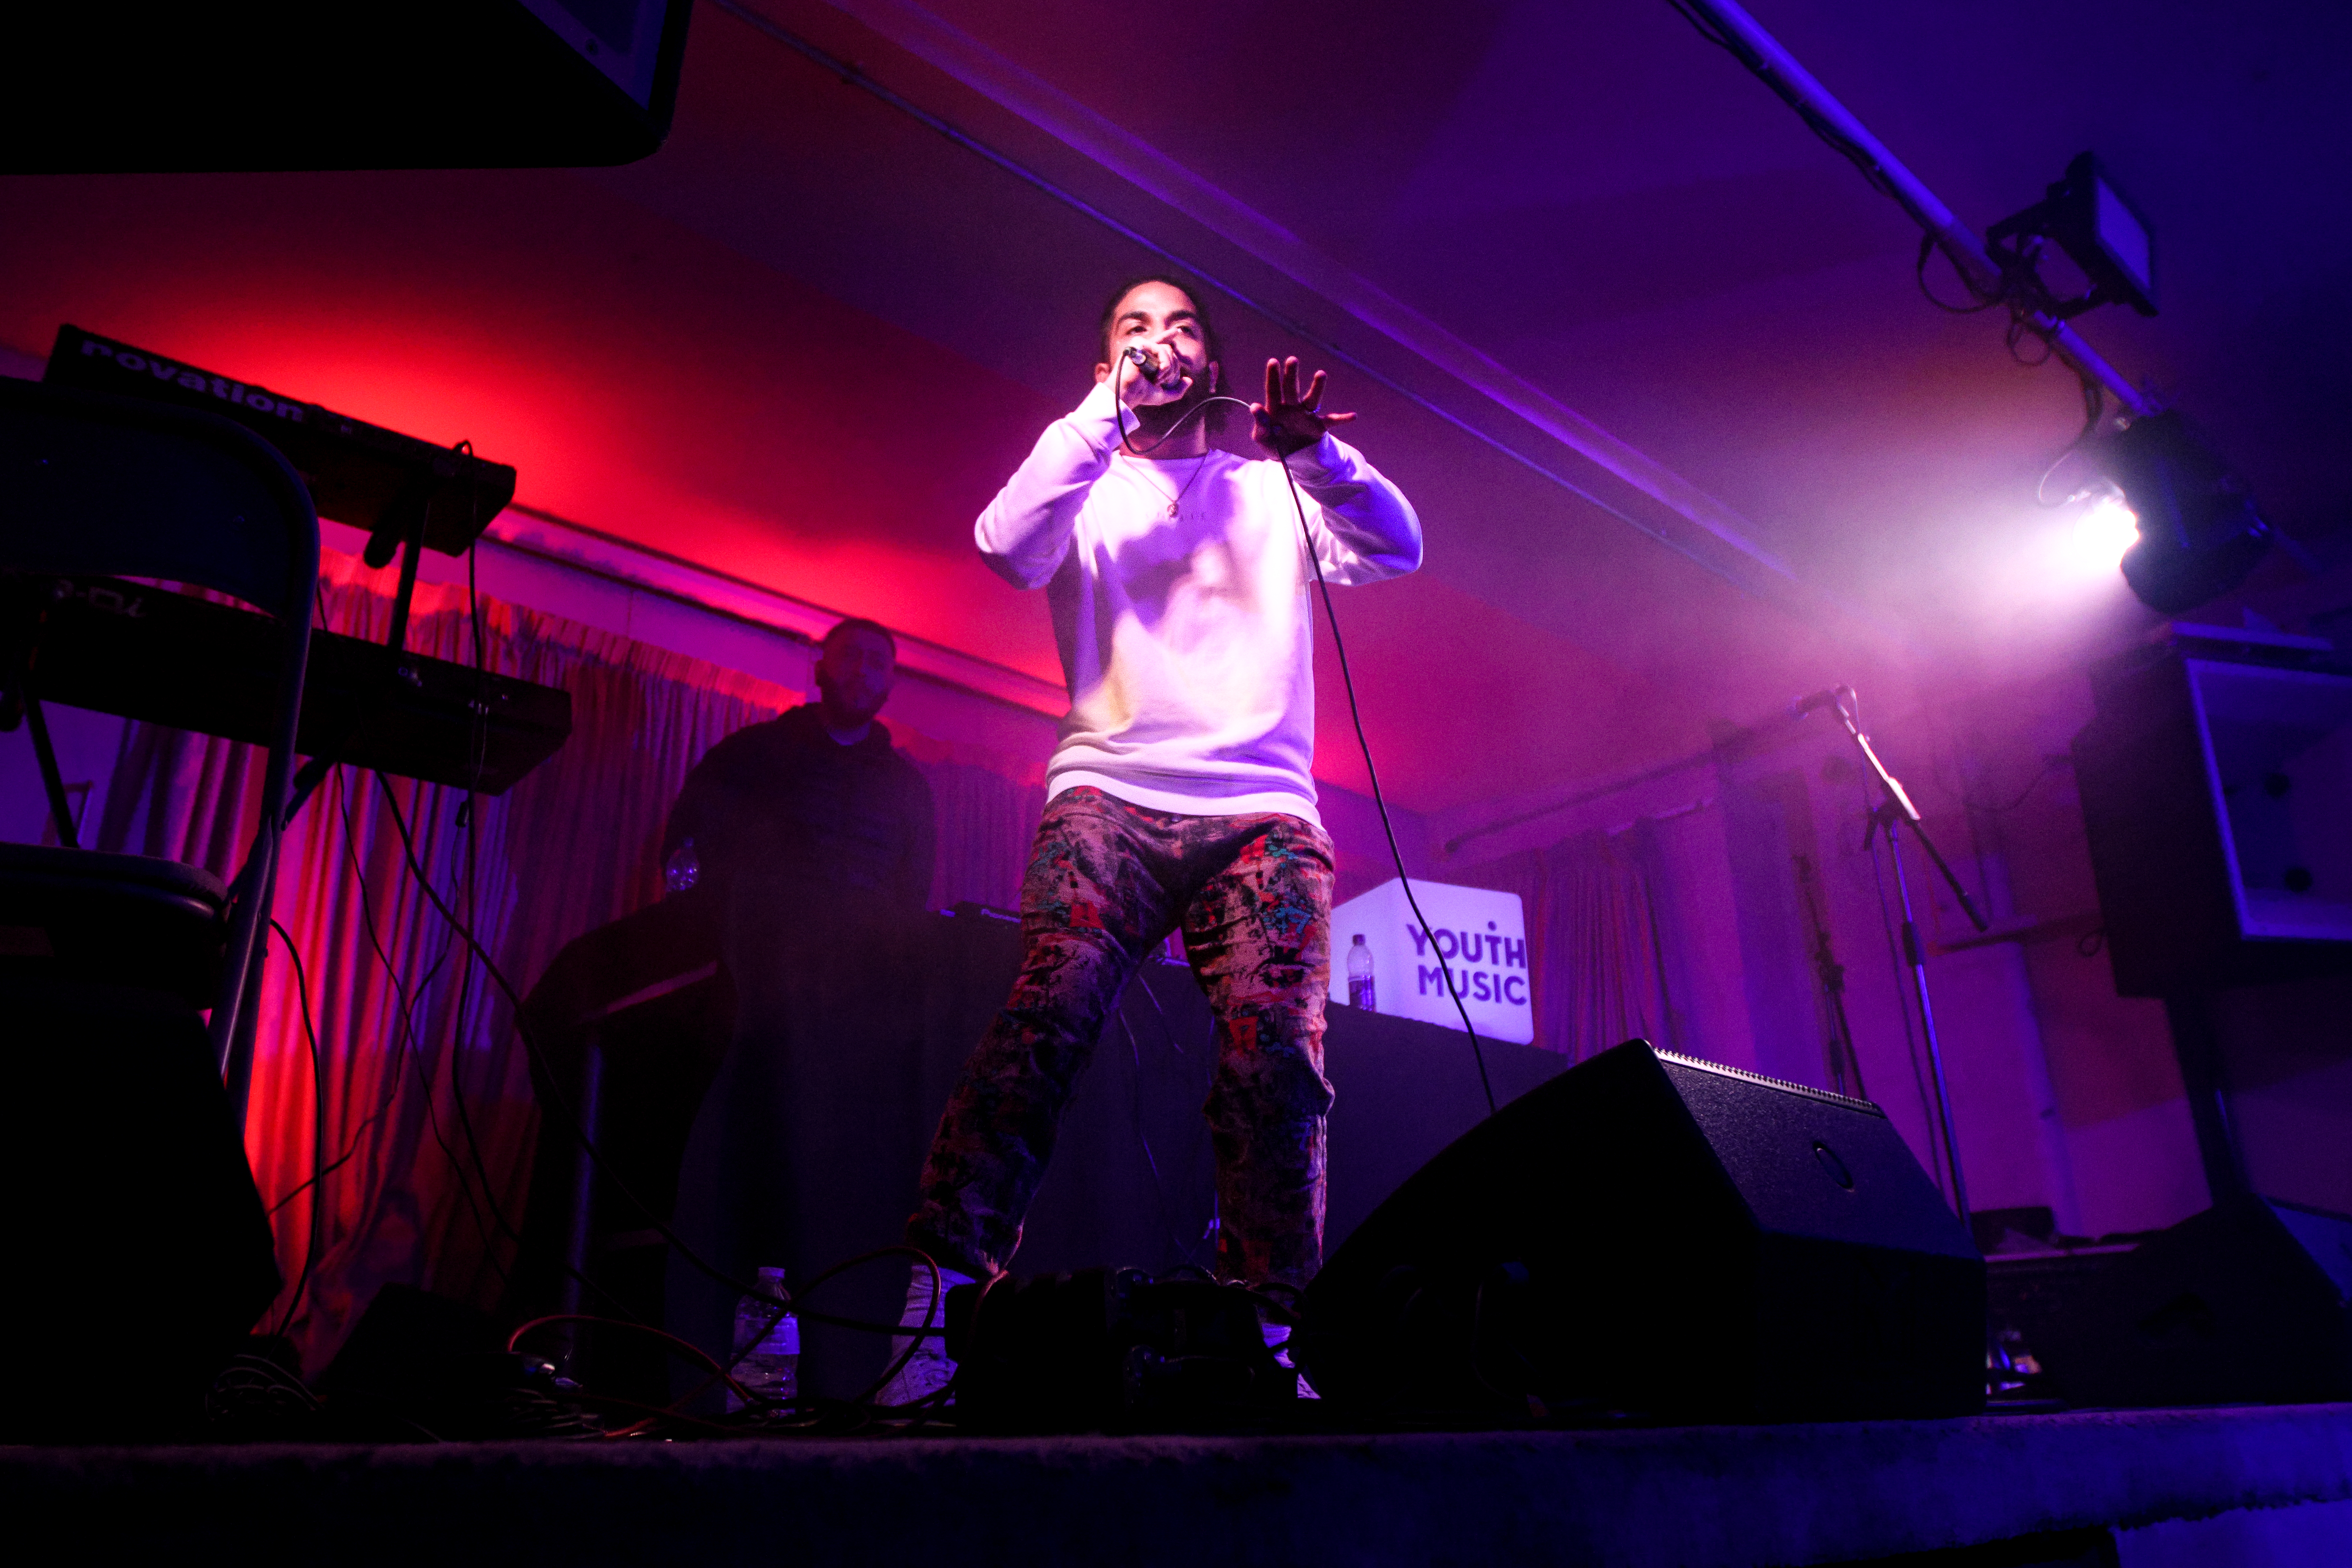 a man in a white jumper and patterned trousers stands on stage and sings into a microphone